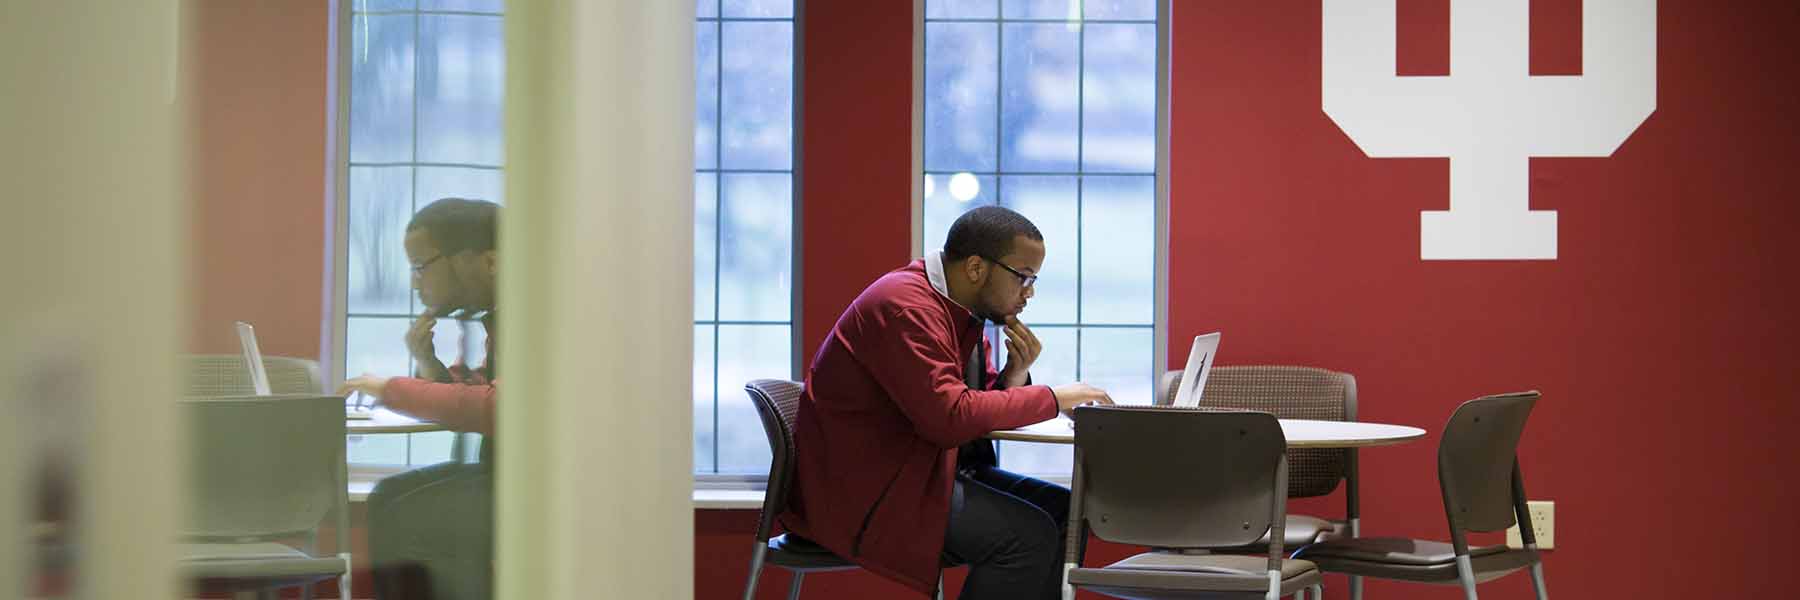 A student works on a computer in front of an IU trident.